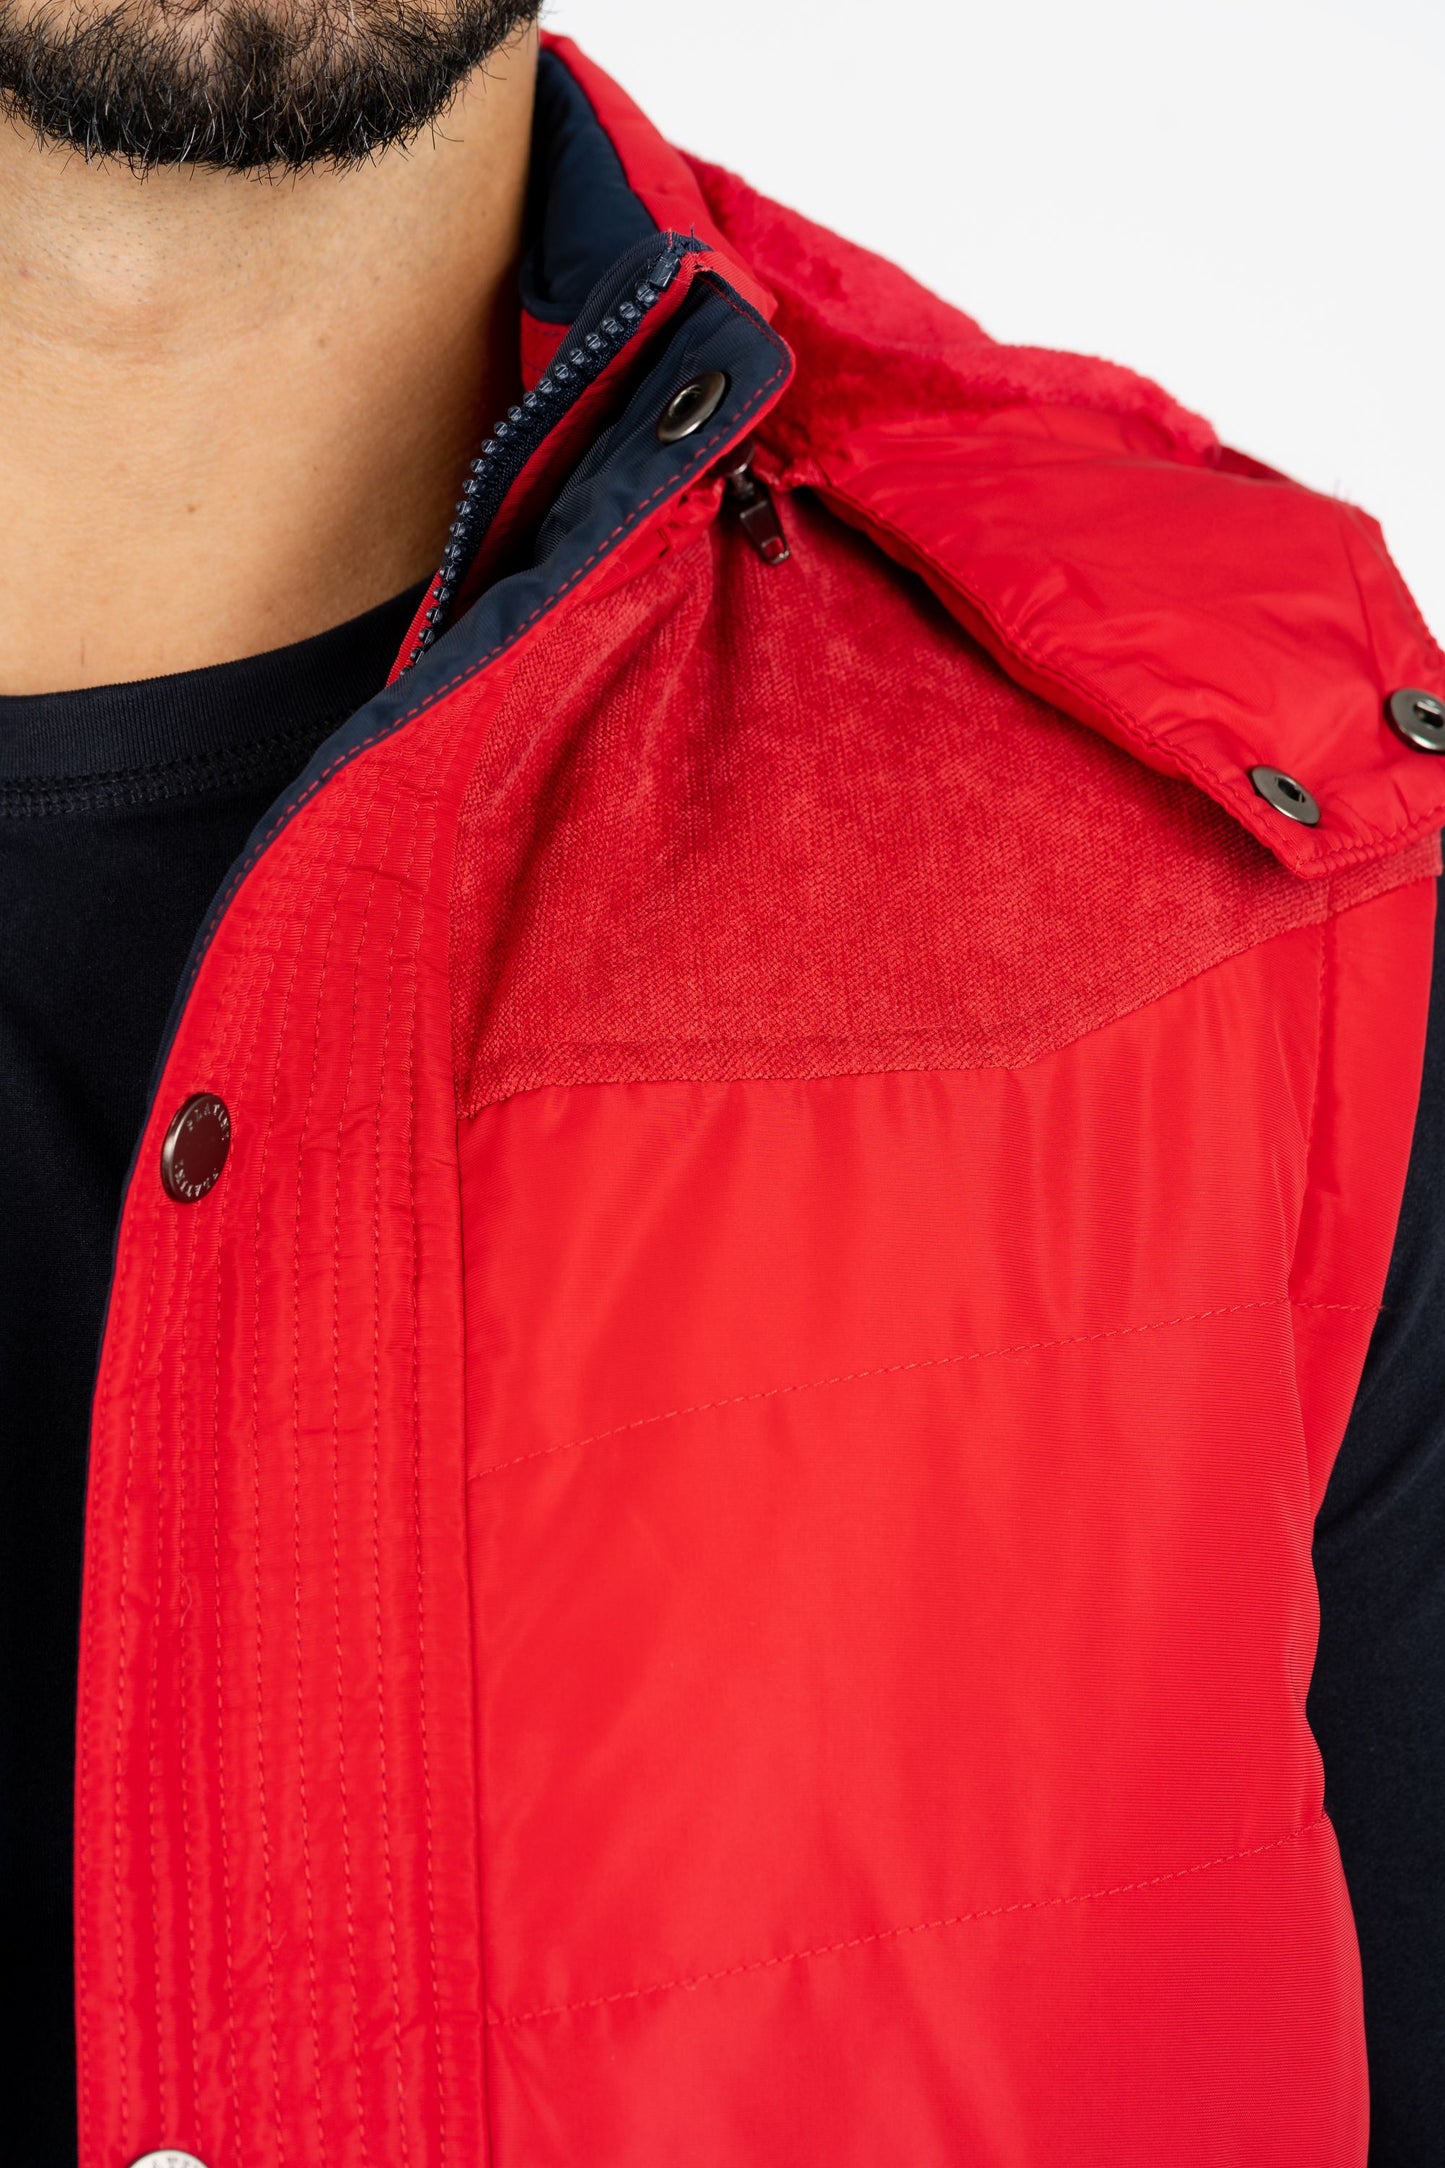 Men's Red Padded Hooded Vest w/ Faux Fur Lining